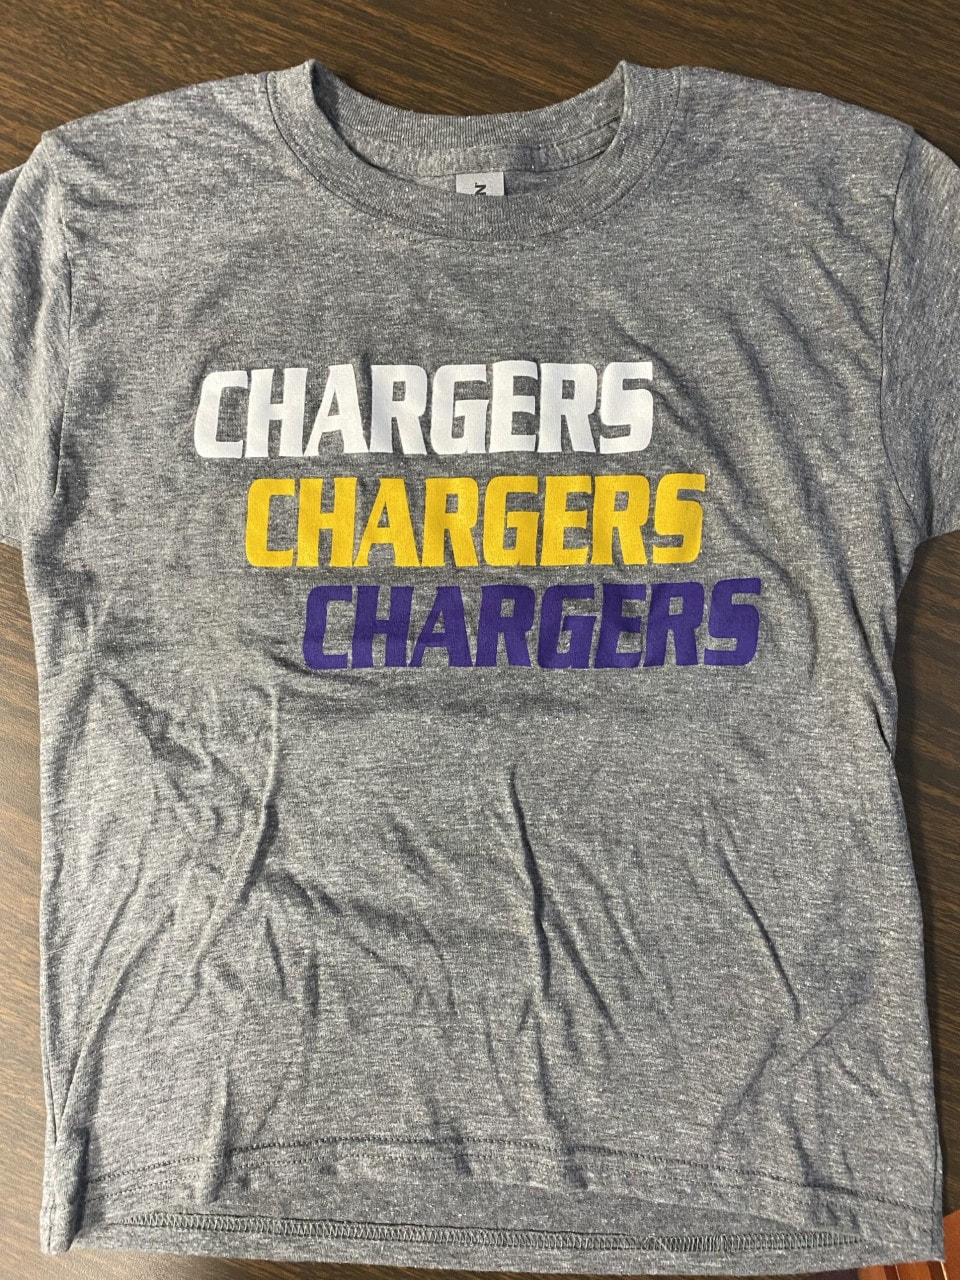 3 Chargers T-Shirt | Peoria Christian School